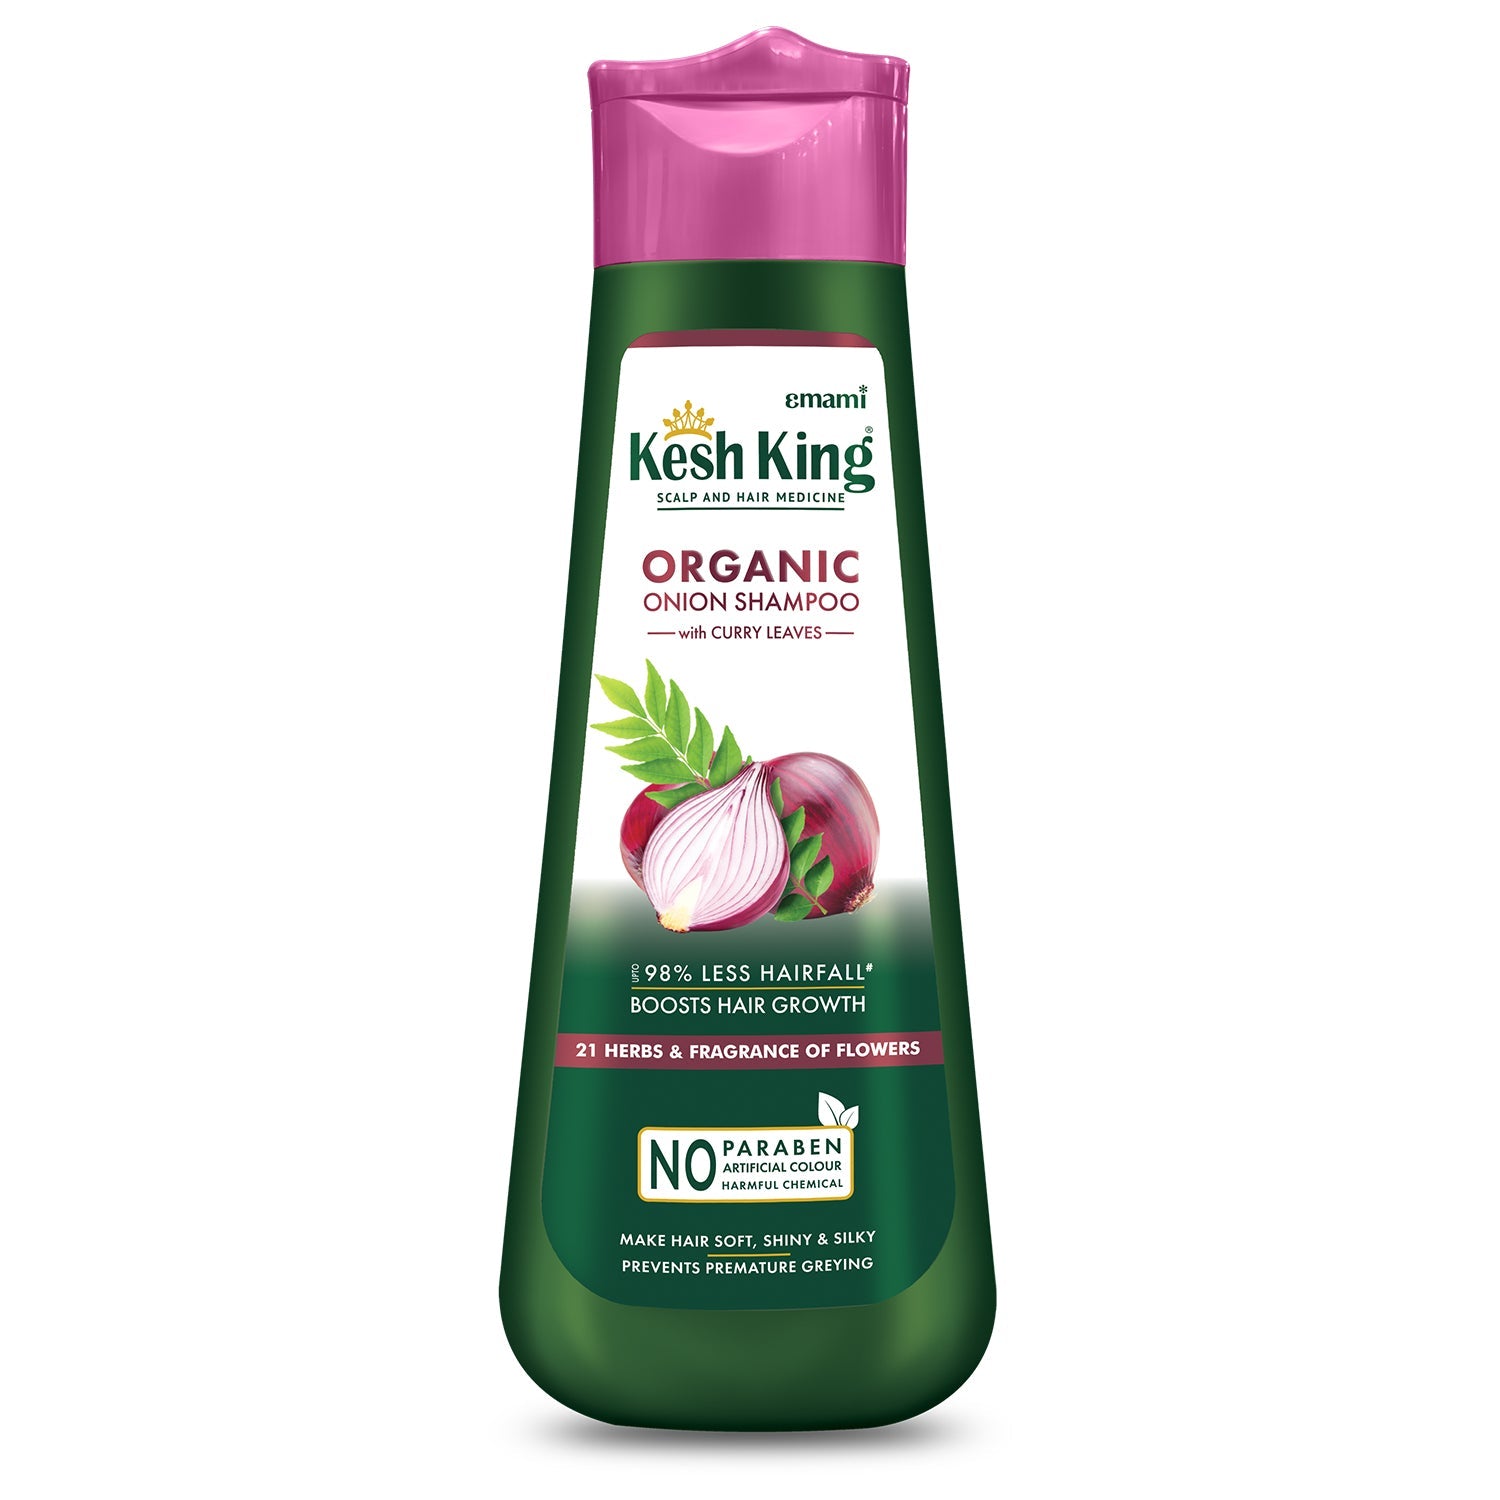 kesh king products